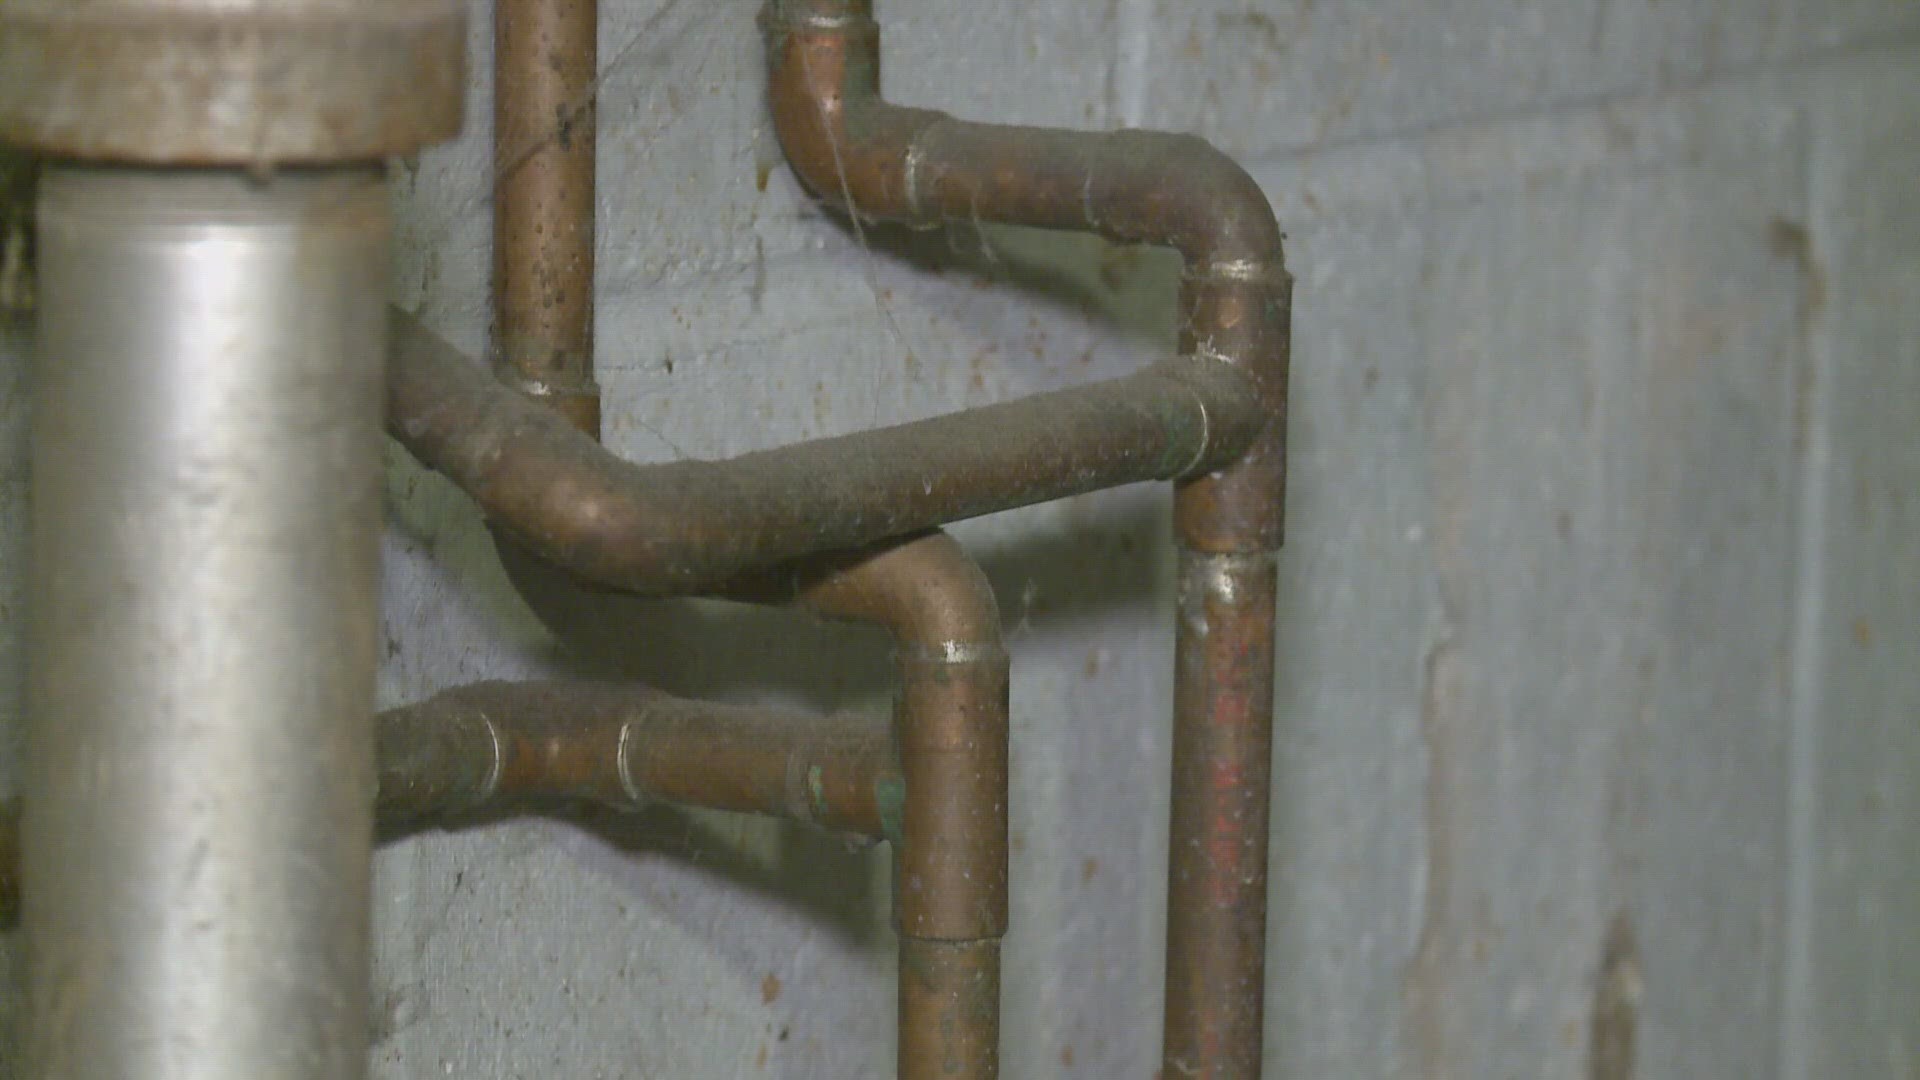 With frigid temperatures taking hold across Northeast Ohio, frozen pipes become a big concern. 3News' Kierra Cotton has some important tips.